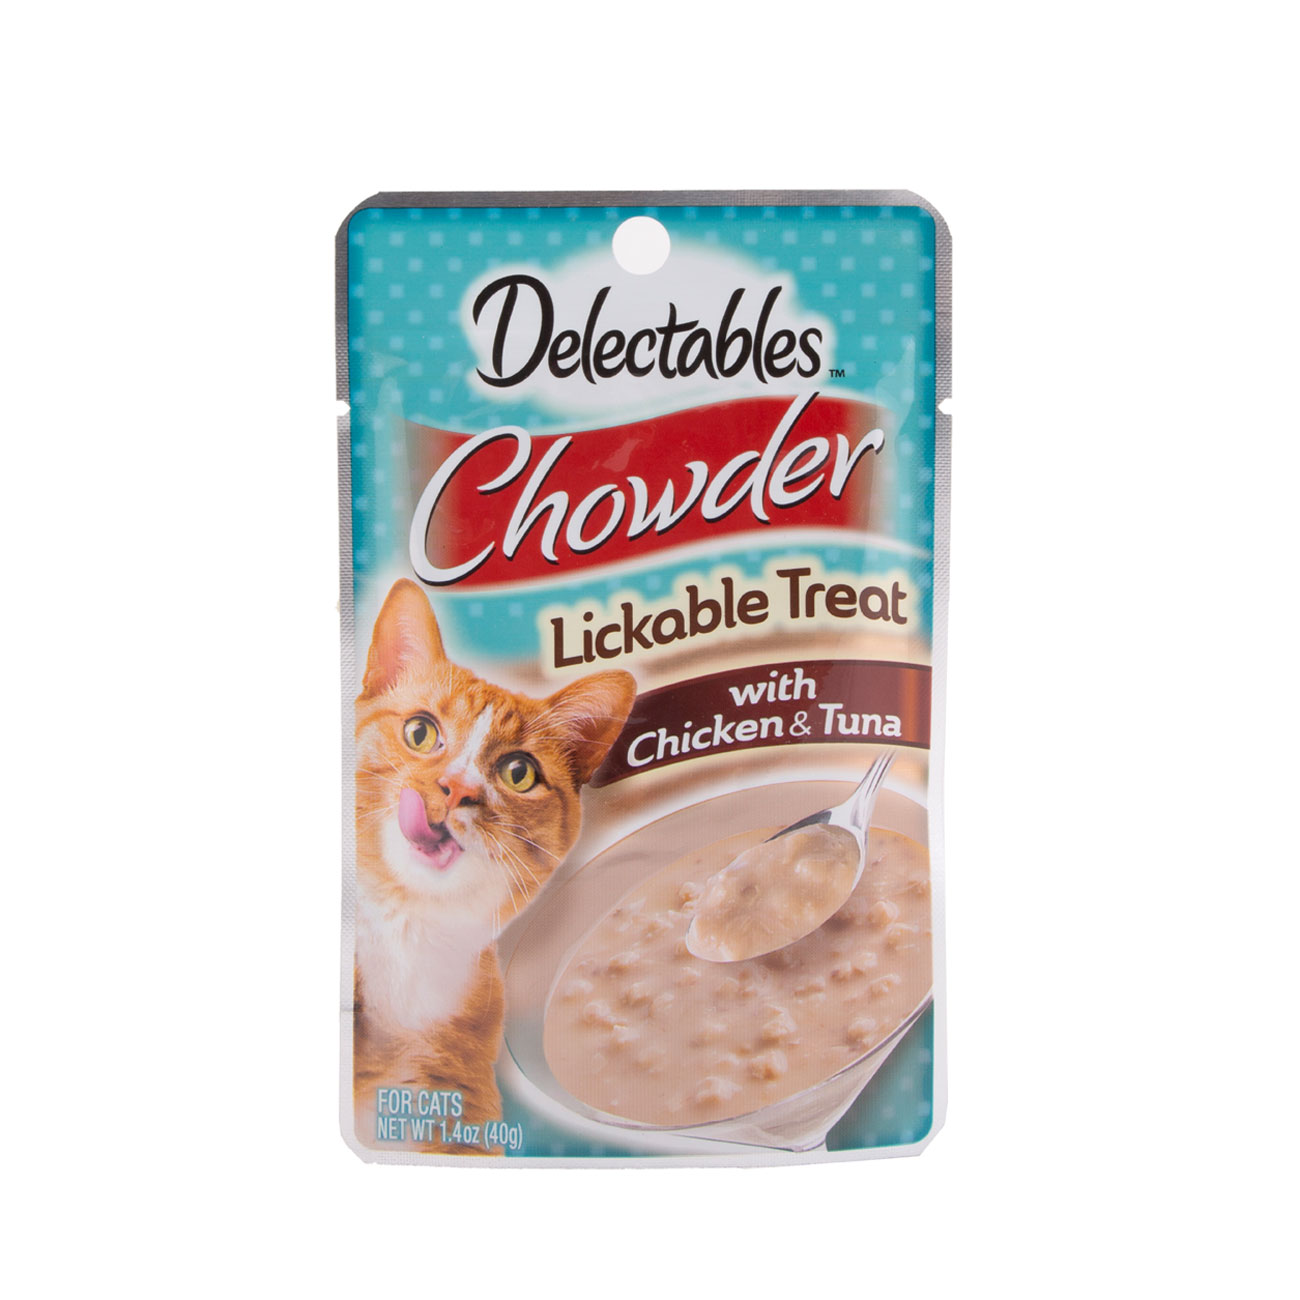 Hartz Delectables™ Lickable Treat chowder. Front of package. The package has a picture of a cat and Hartz Delectables lickable treat chowder.